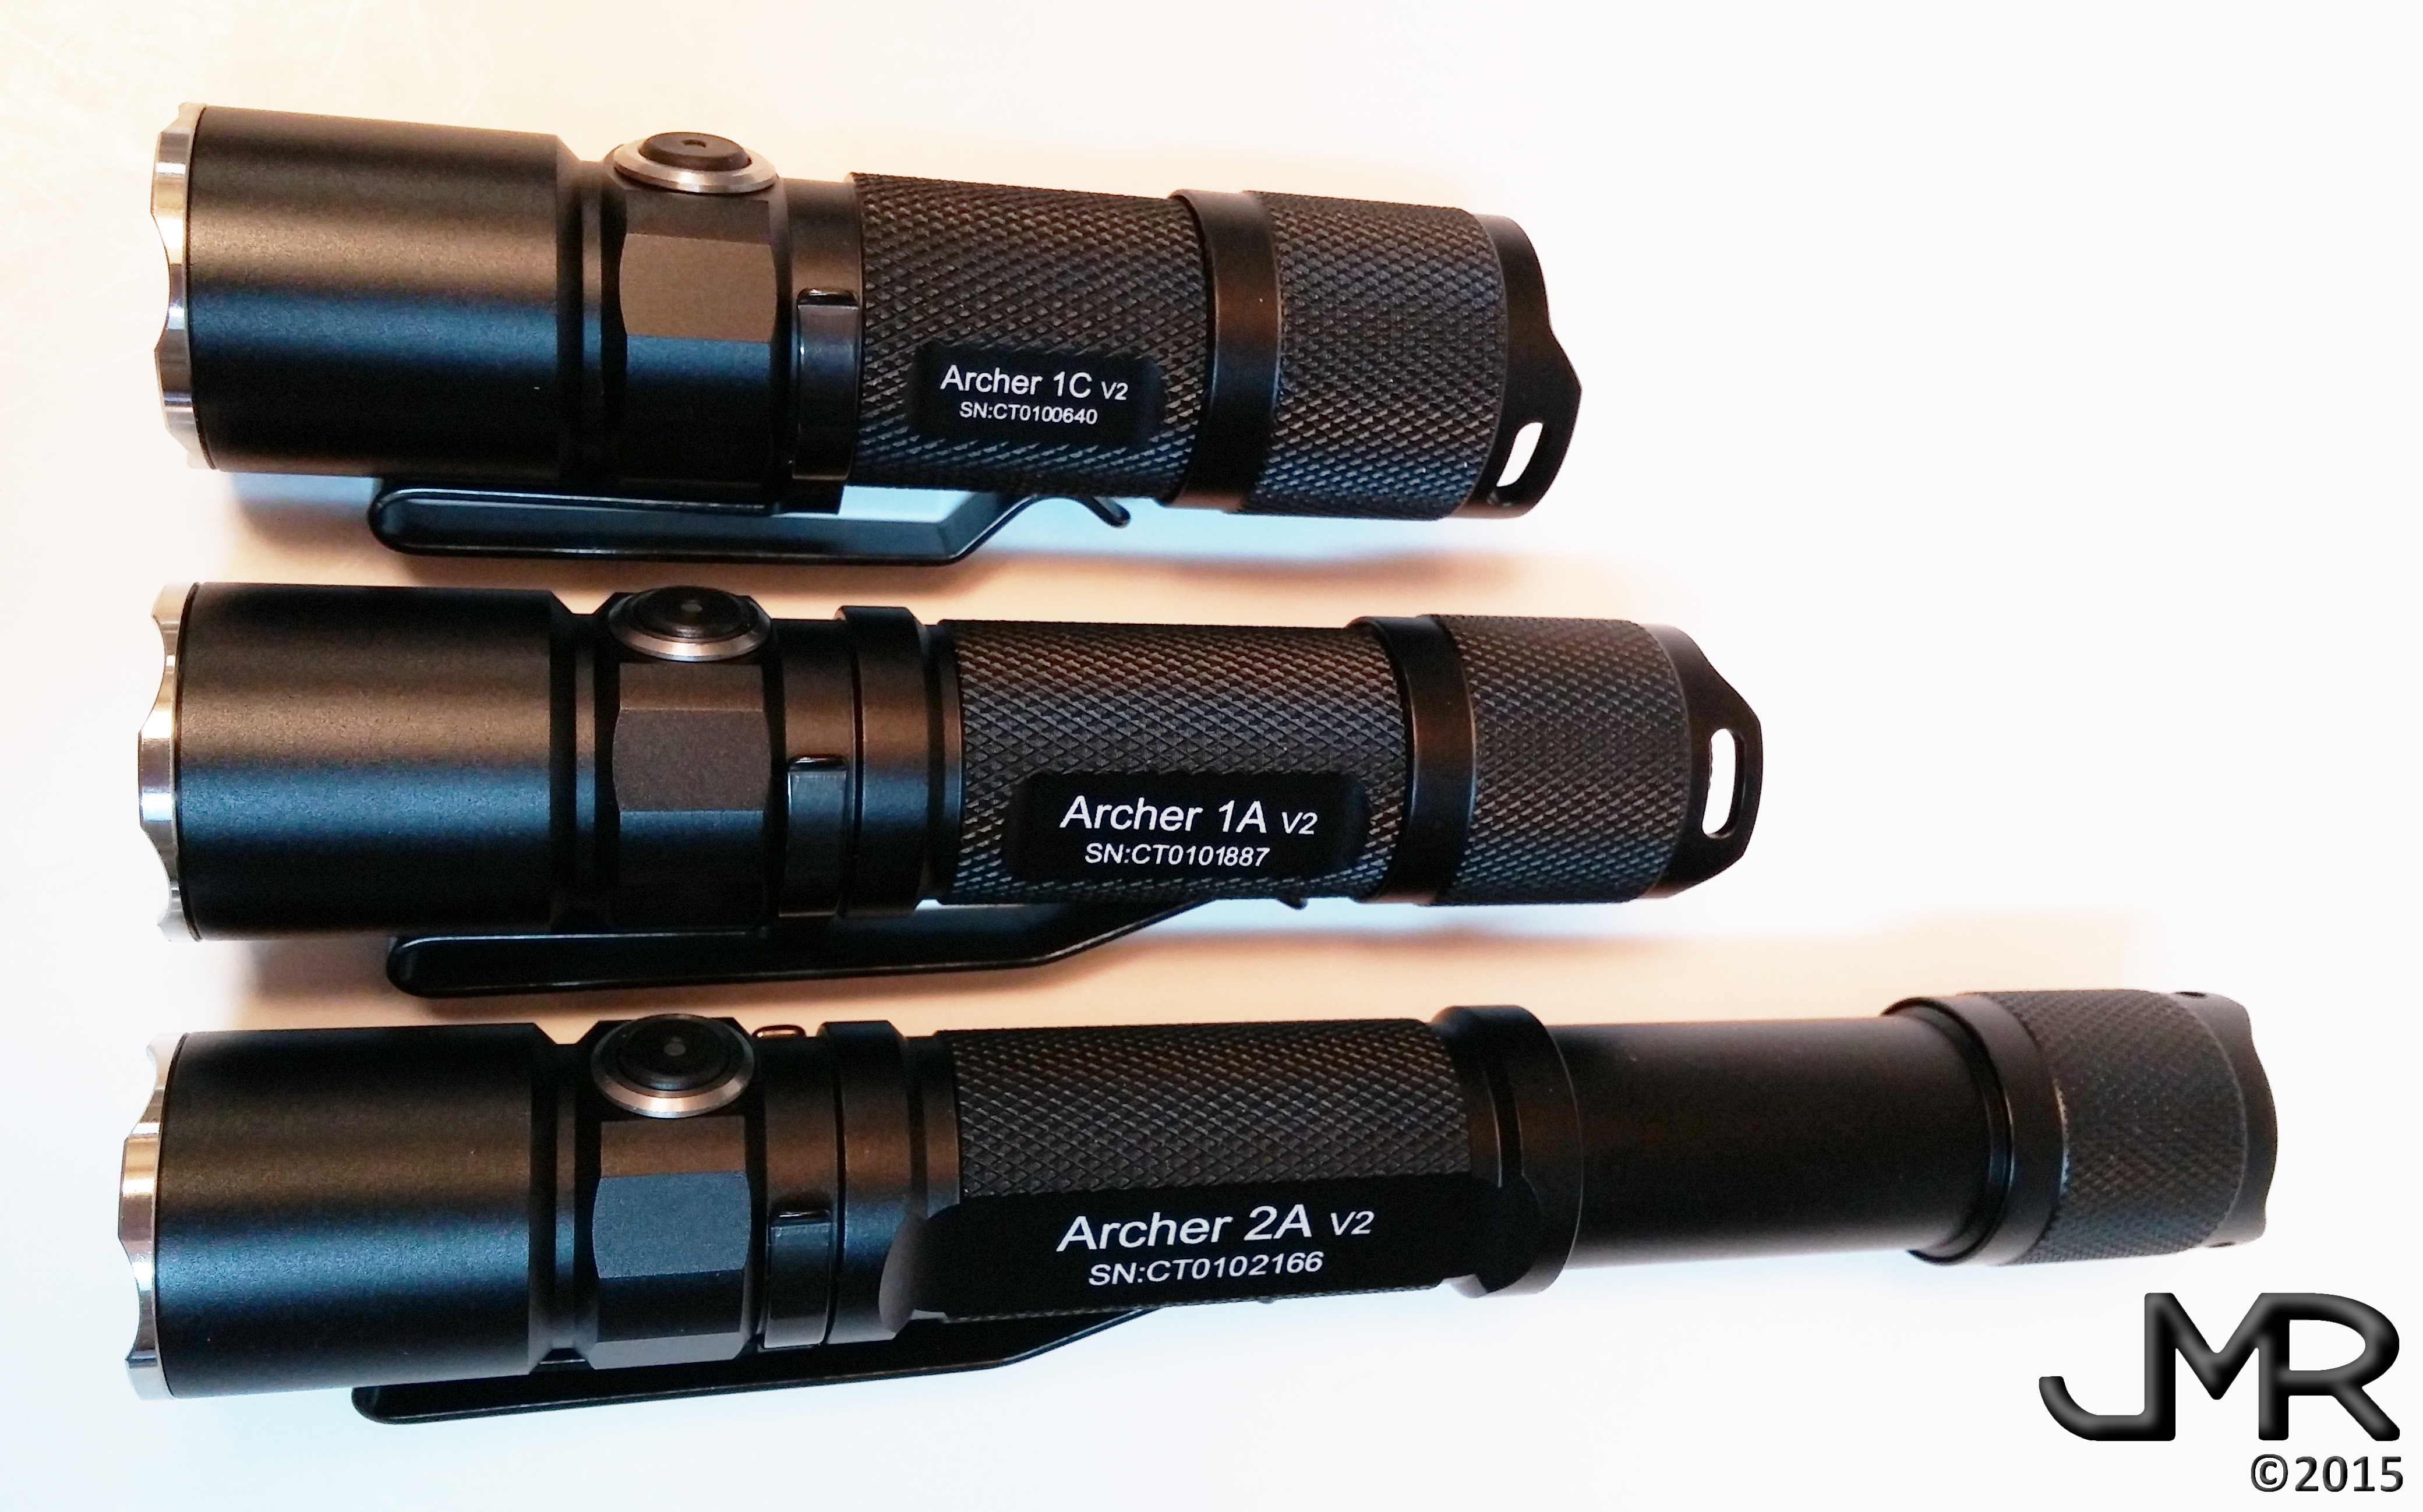 Archer 2A V3 Neutral W Long Runtime Orange Peel Reflector Waterproof Stainless Steel Strike Bezel Reliable AA Flashlight! U Shape Tactical Thumb Groove Strobe Firefly 5-Mode 2*AA Batteries Memory Function ThruNite® Archer 2A V3 500 Lumens 